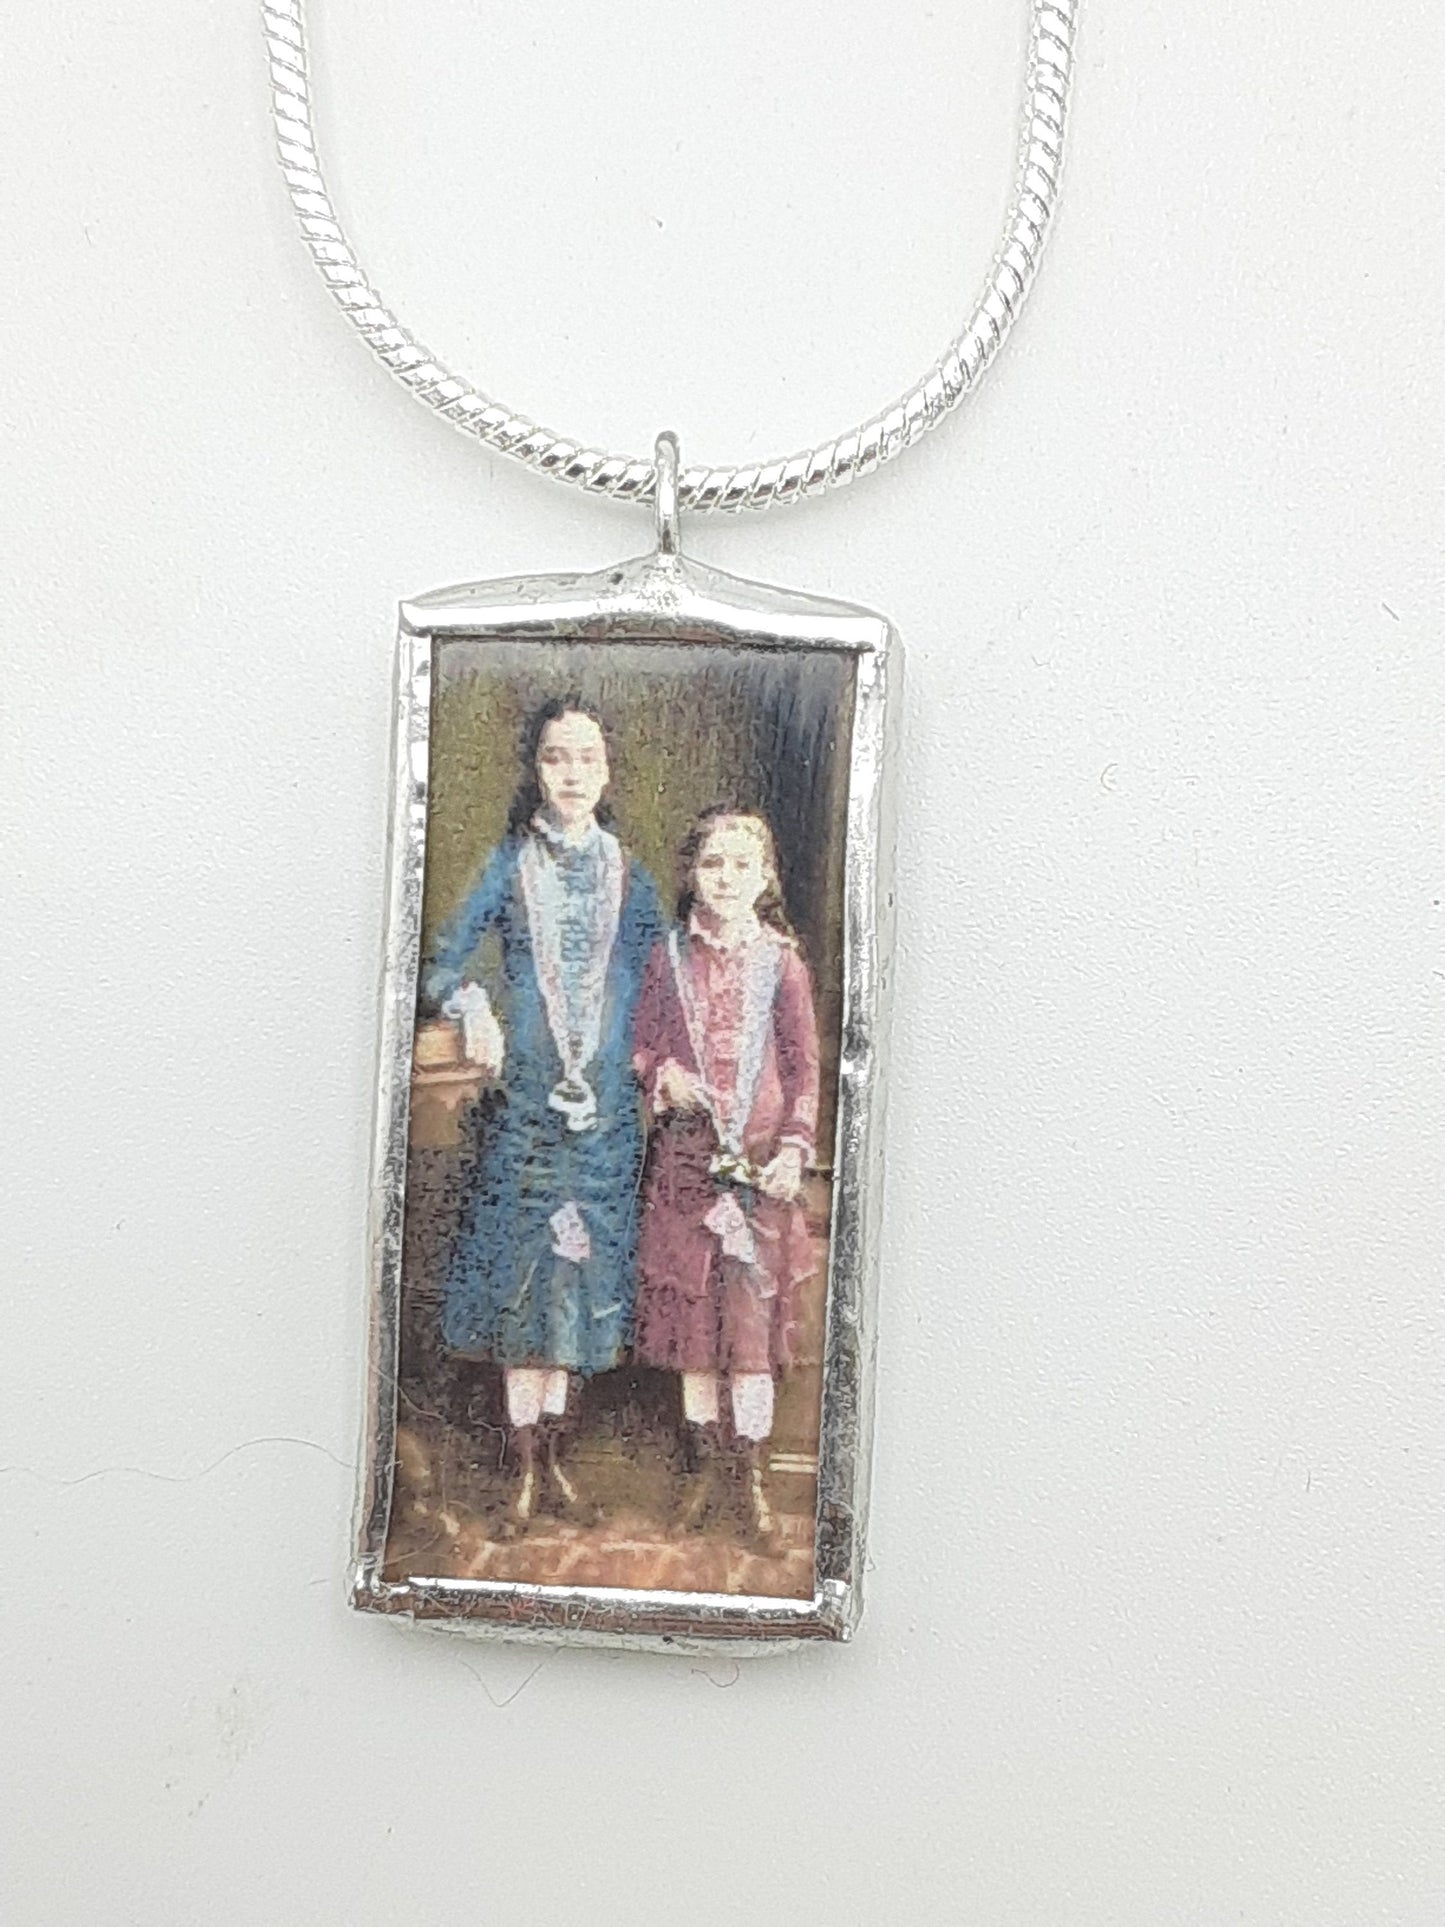 Saint Therese and Celine Medal - Hand Soldered Charm Pendant - Catholic Jewelry